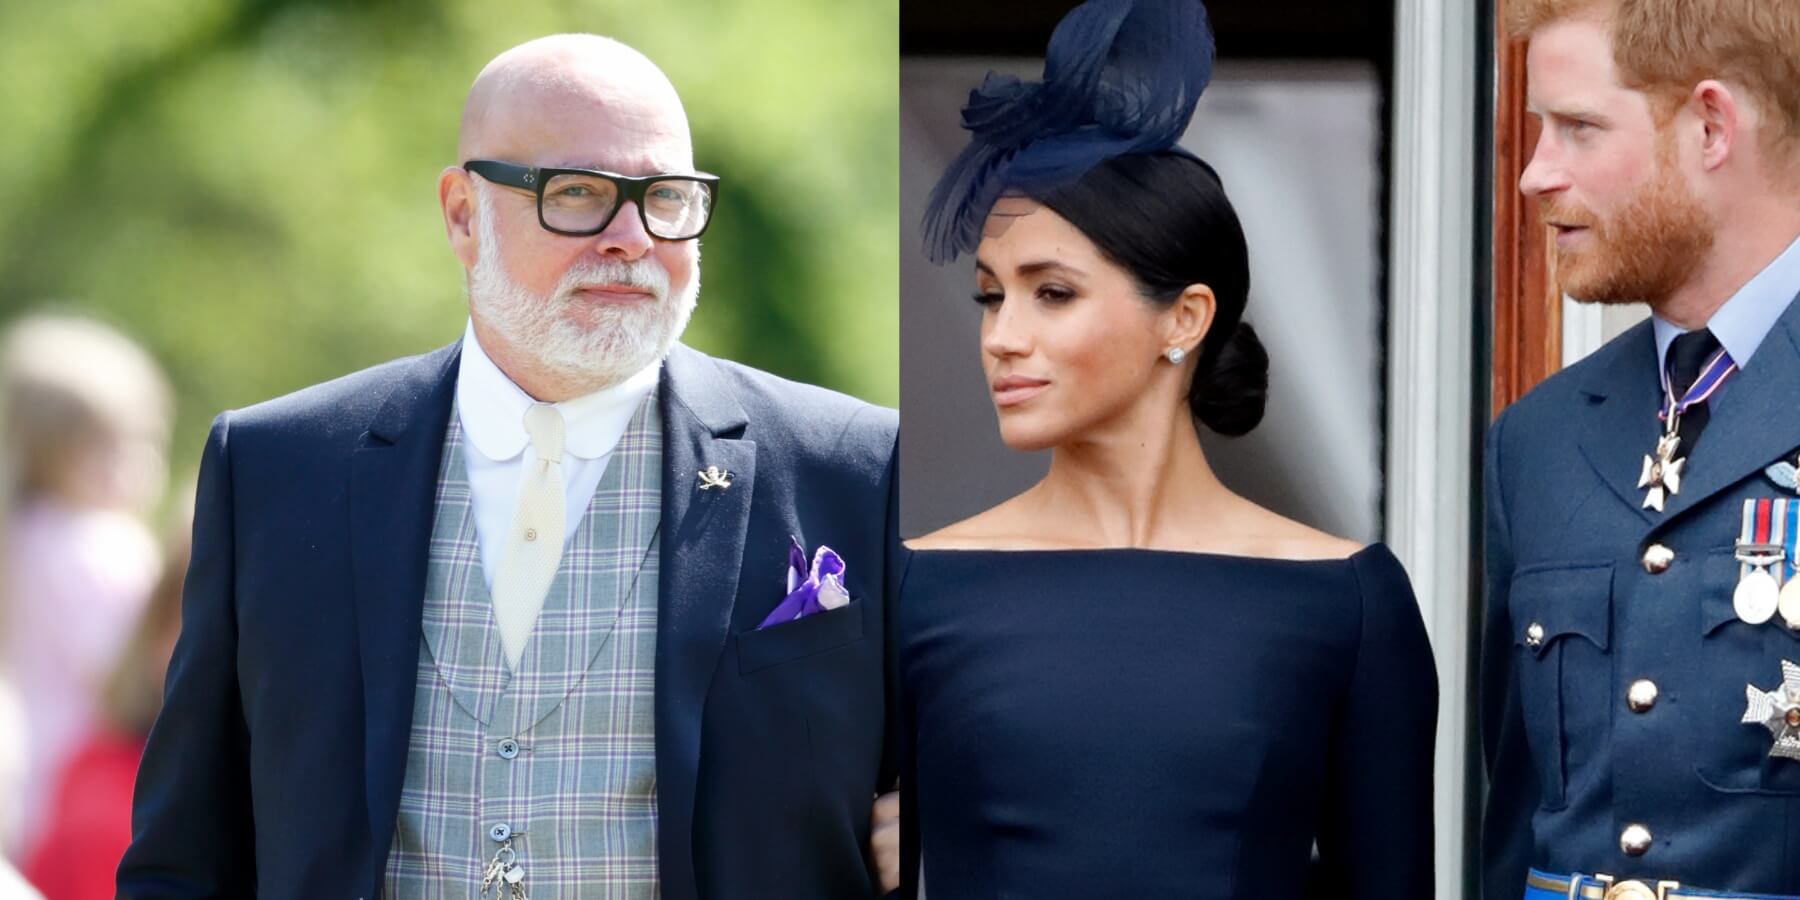 Kate Middleton’s Uncle Wants Prince Harry, Meghan Markle’s Titles Stripped